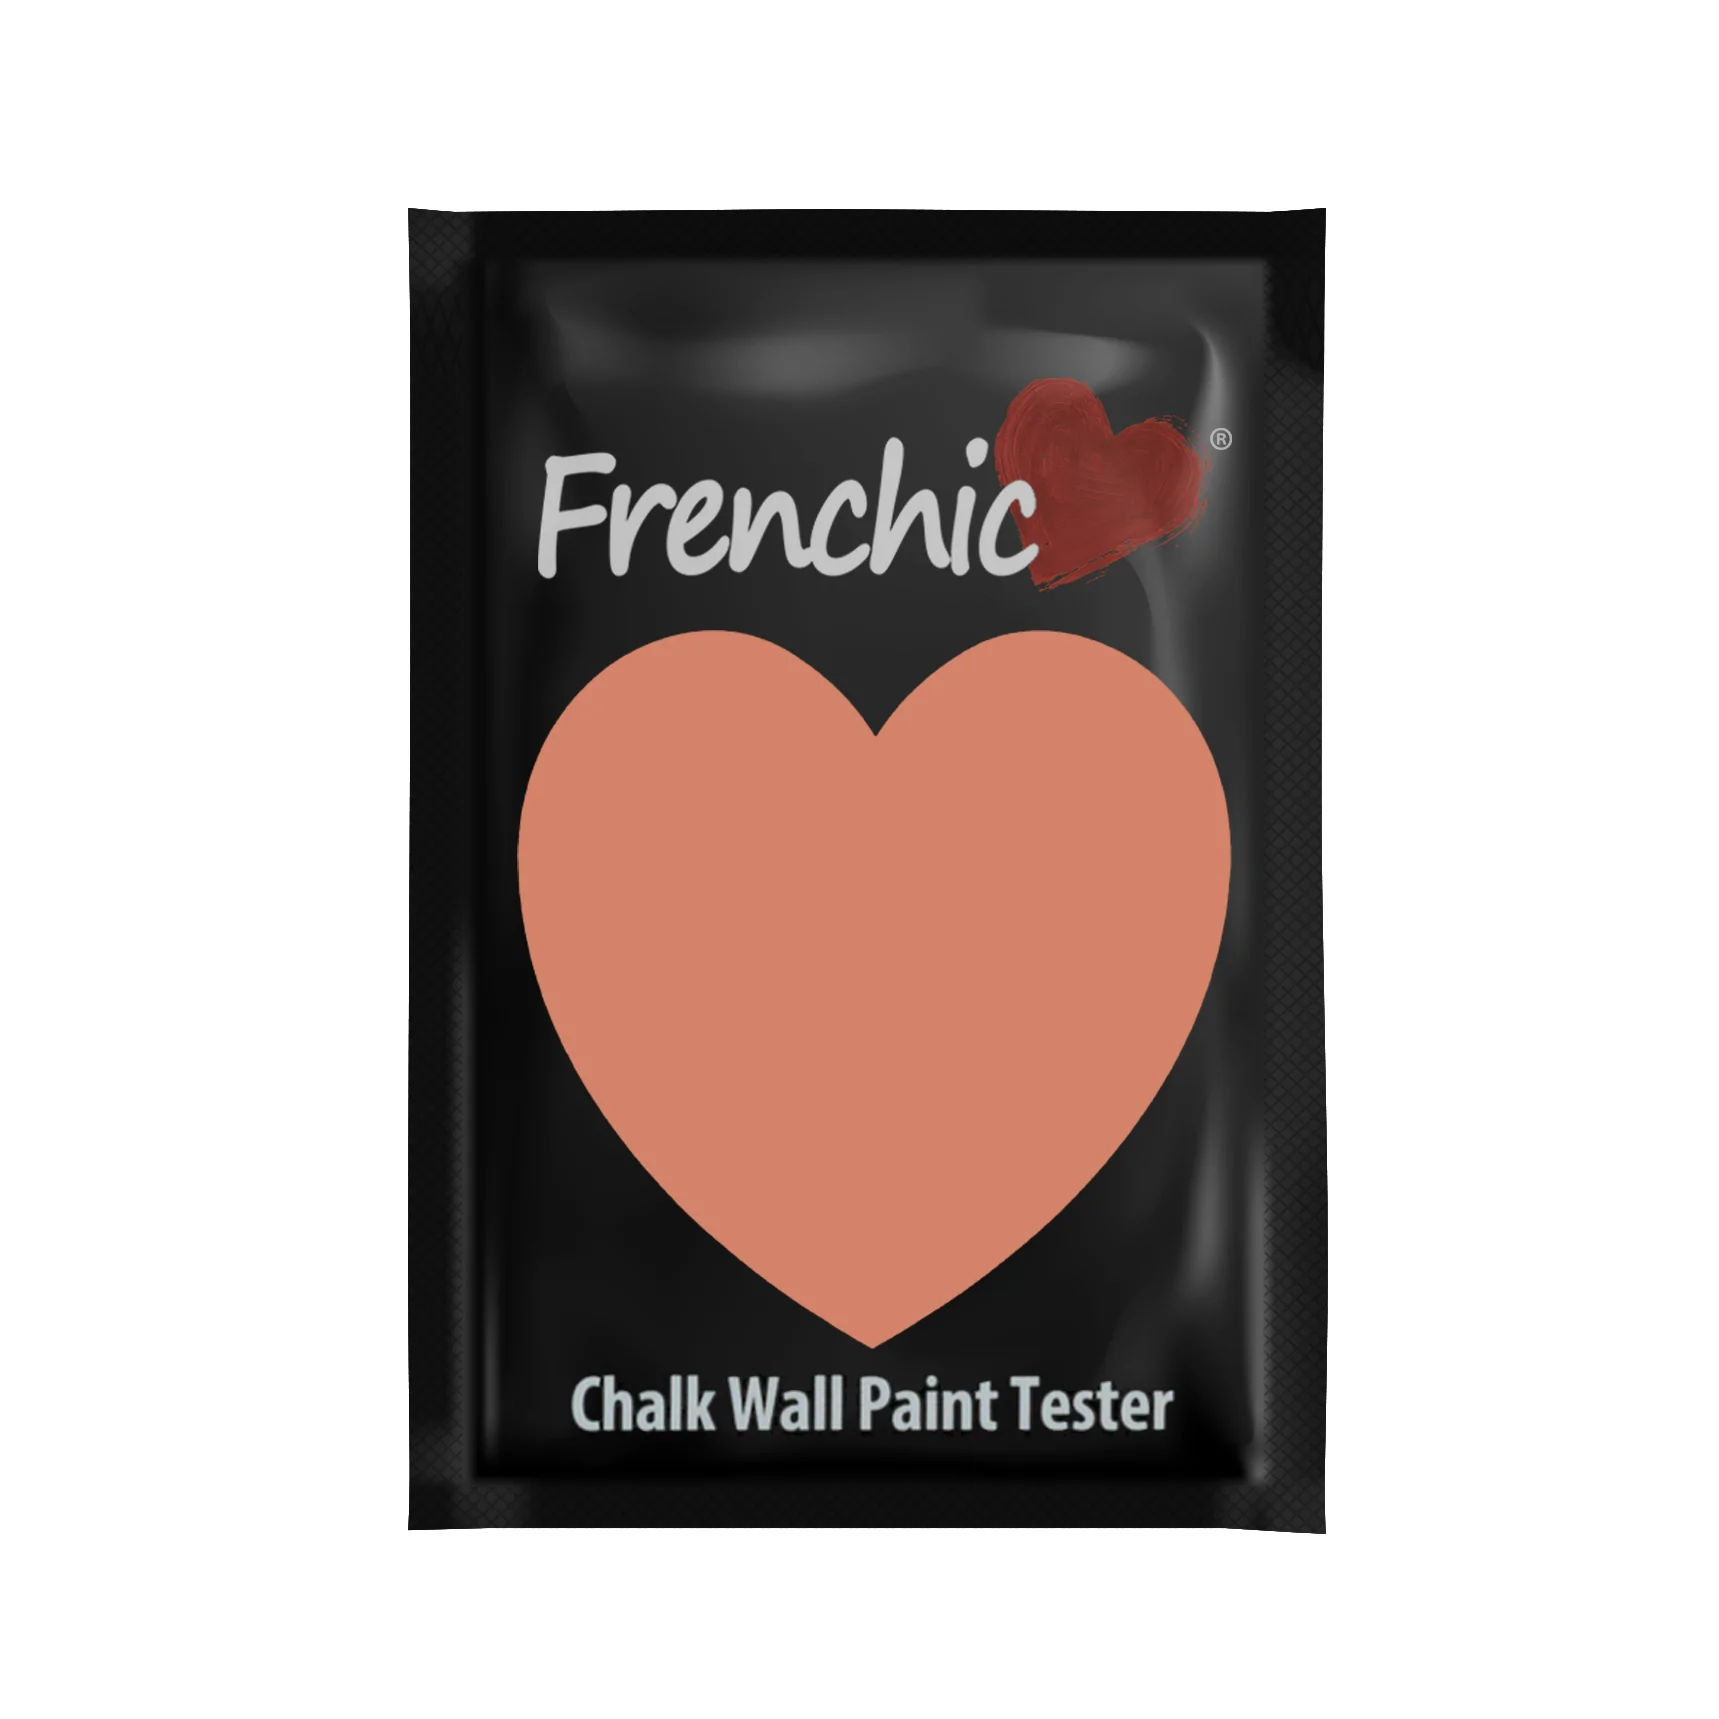 Frenchic Paint | Clay Pot Wall Paint Sample by Weirs of Baggot Street